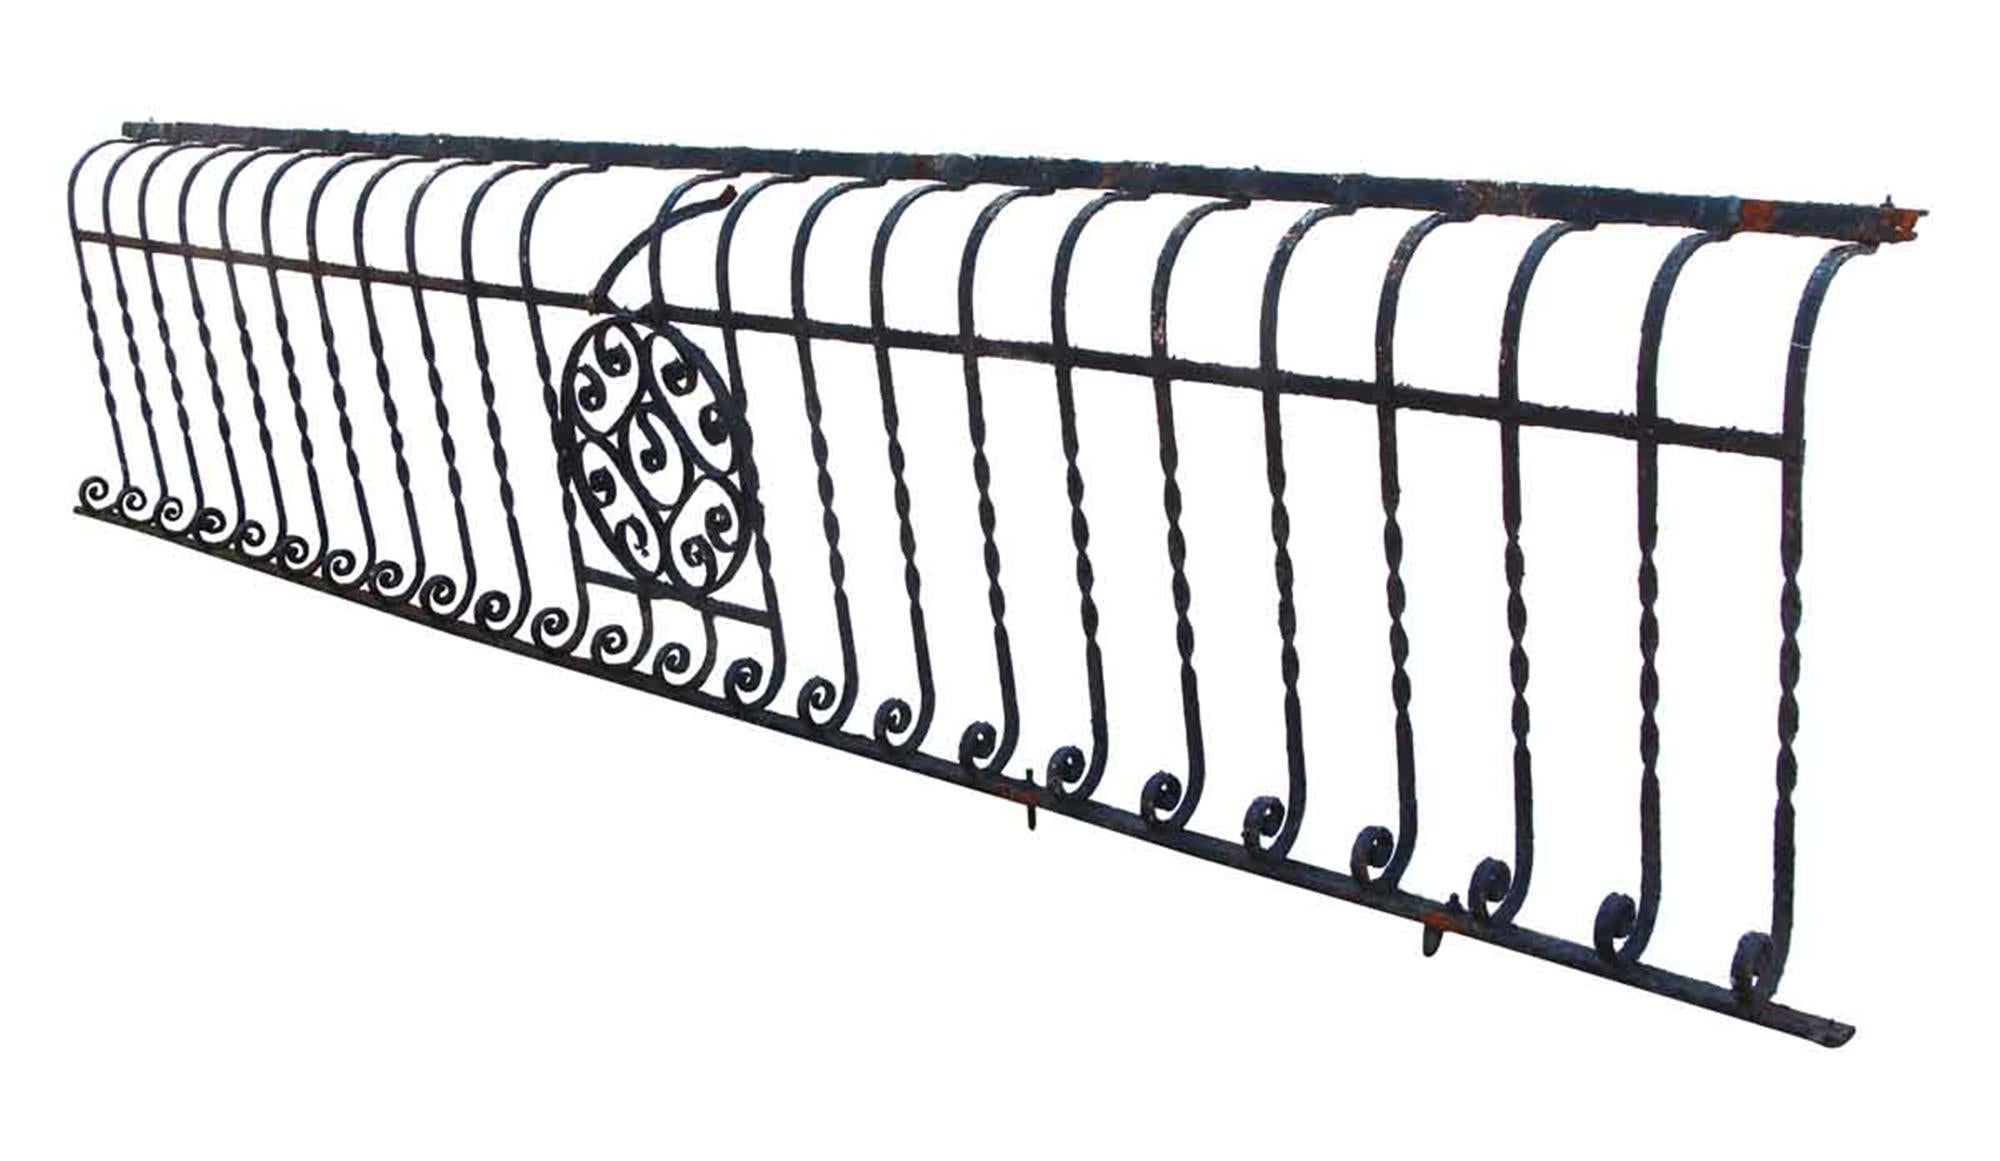 1880s wrought iron balcony with turns and curls and a central medallion. The balcony bows out approximately 8 inches in a Bombay style. Small quantity available at time of posting. Please inquire. Priced each. This can be seen at our 400 Gilligan St